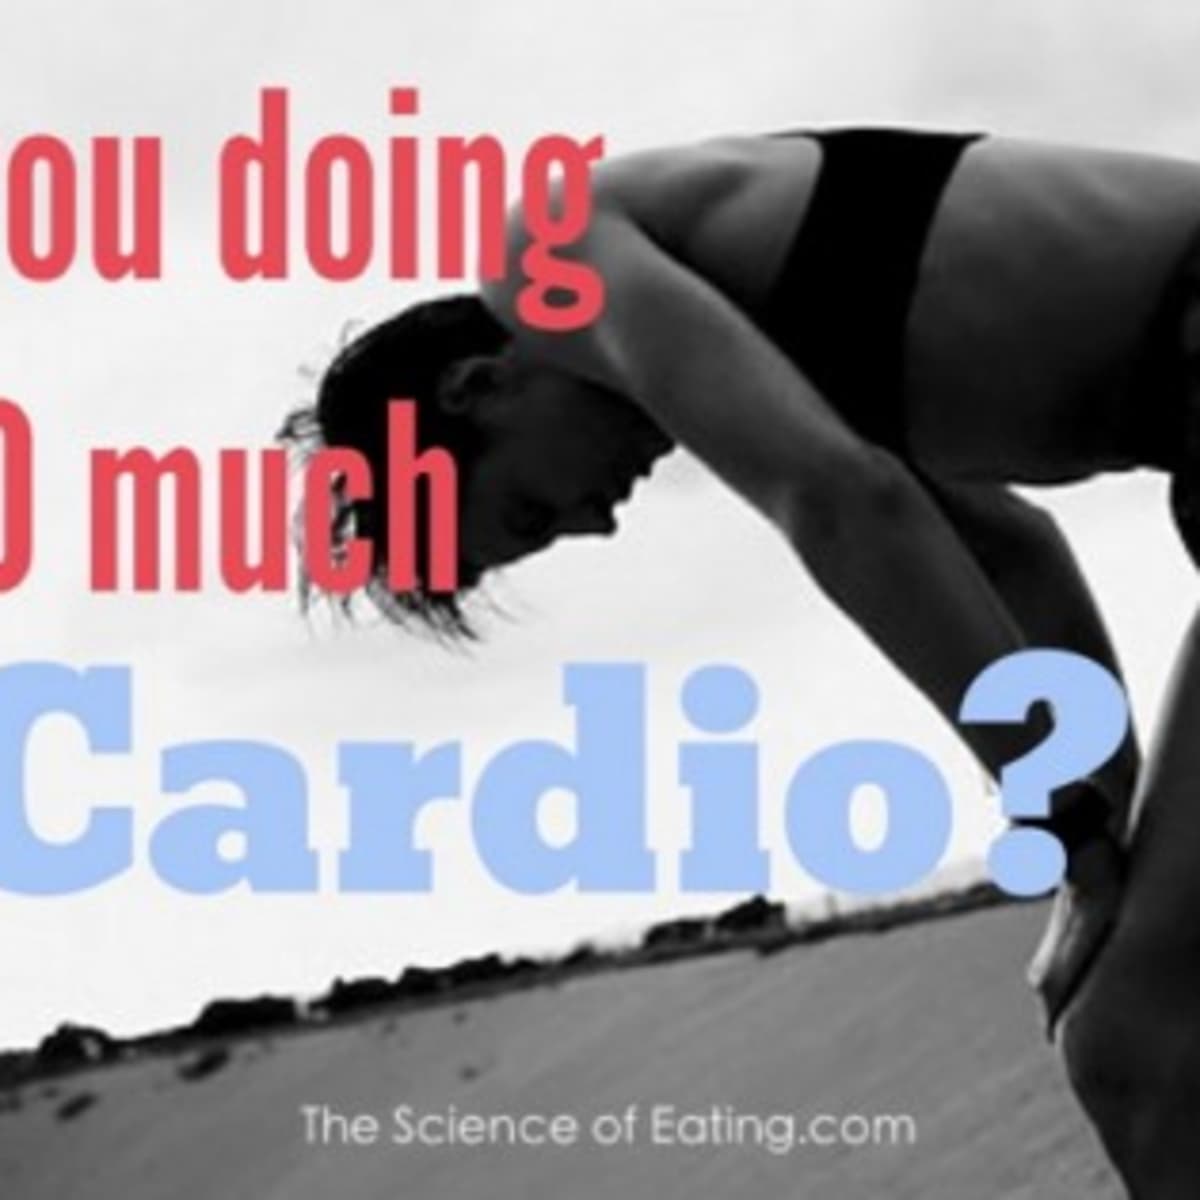 Upper Body Cardio Exercises: Lose Fat And Increase Muscle Strength -  HubPages